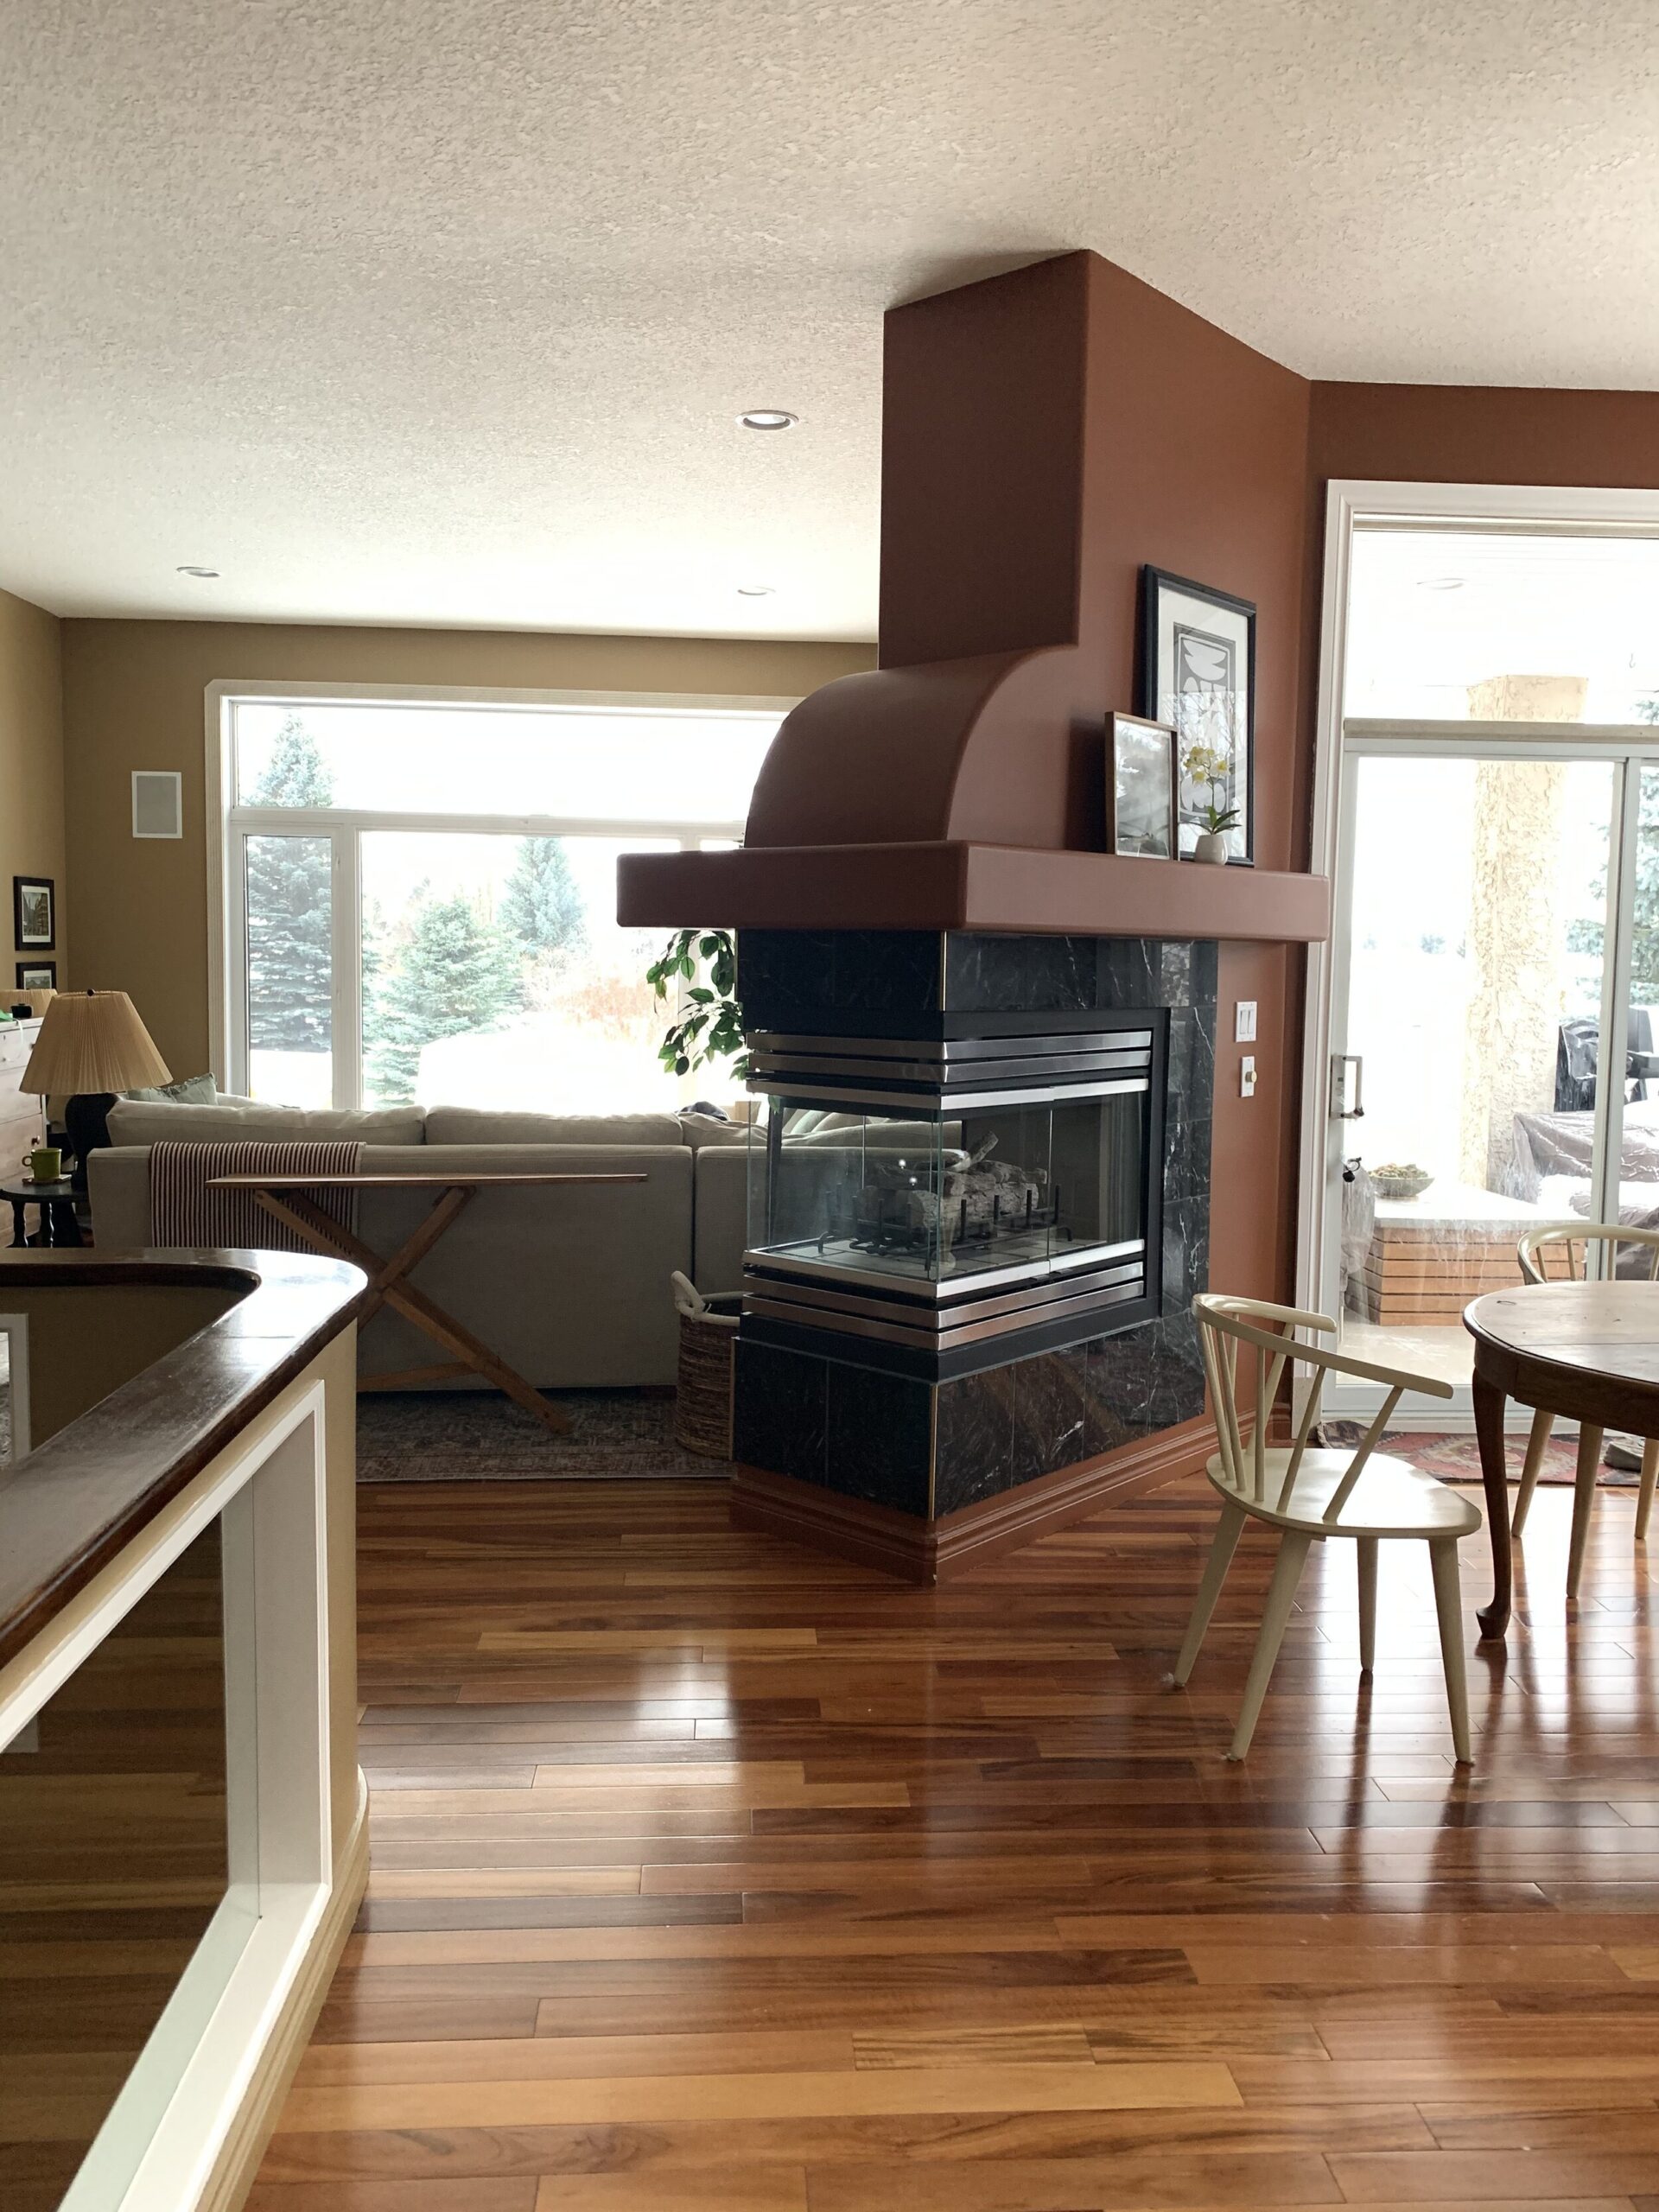 three sided angled fireplace painted brown separating a dining space from a living space